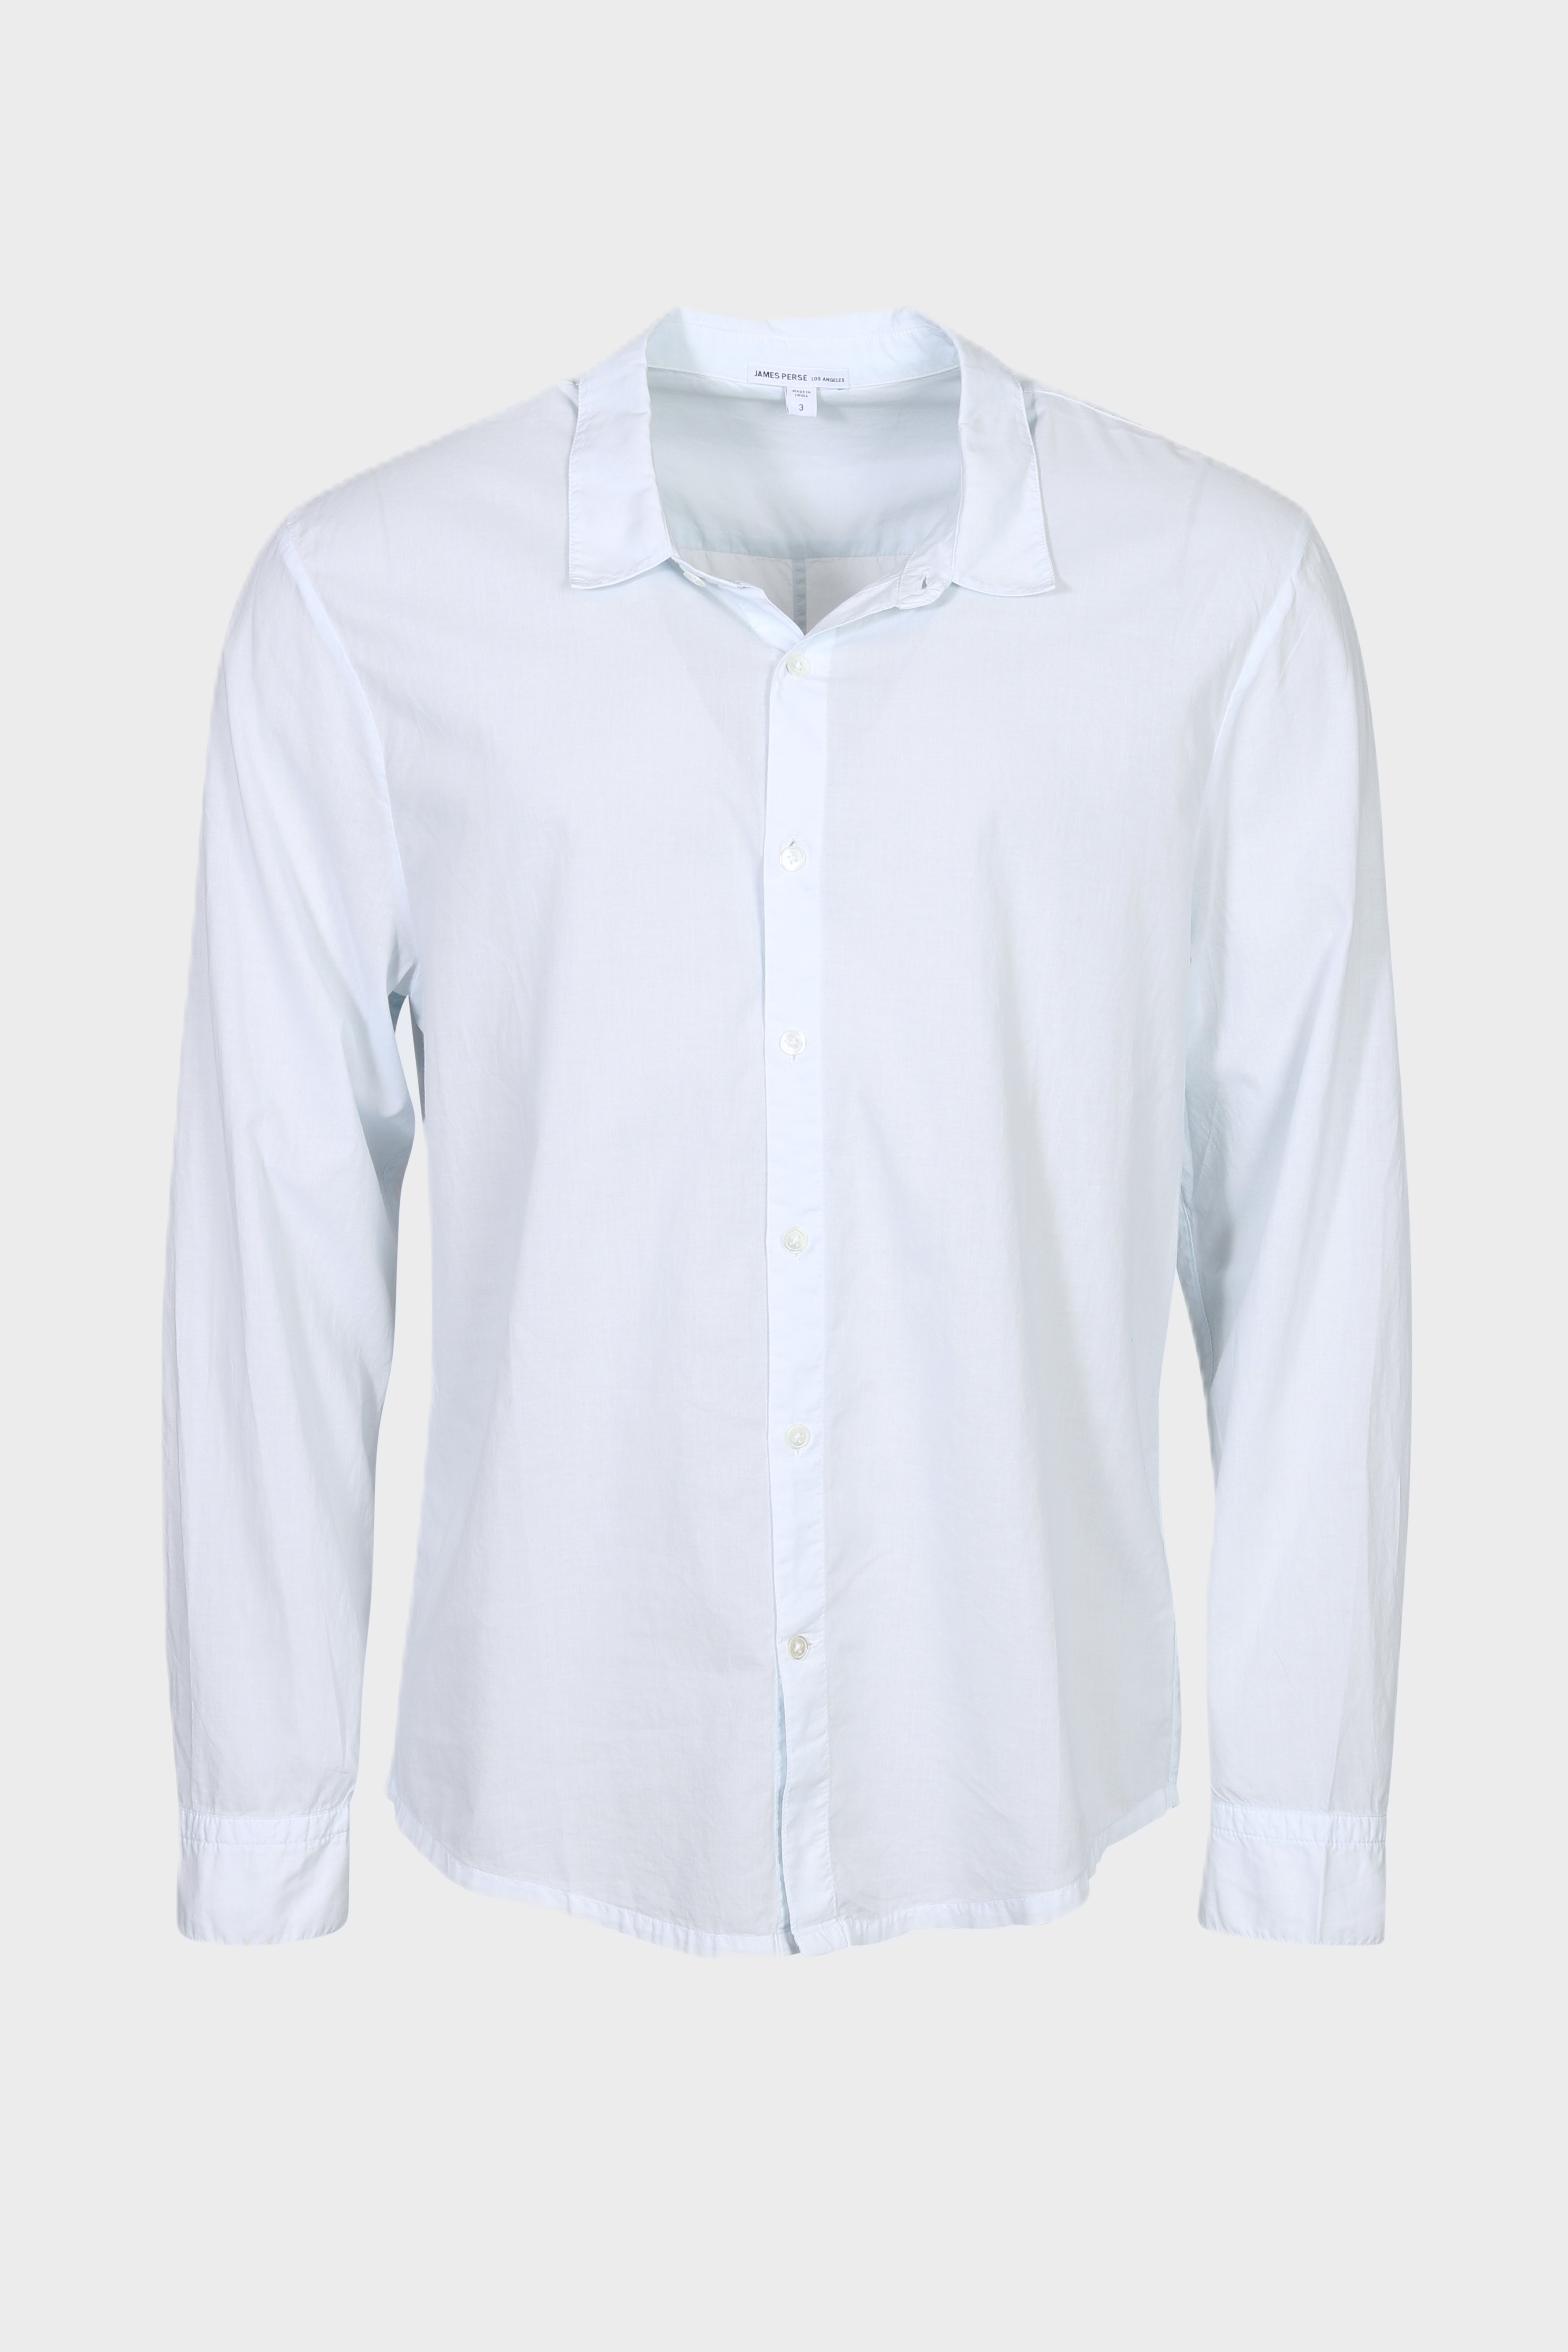 JAMES PERSE Shirt Standard in Ice Blue